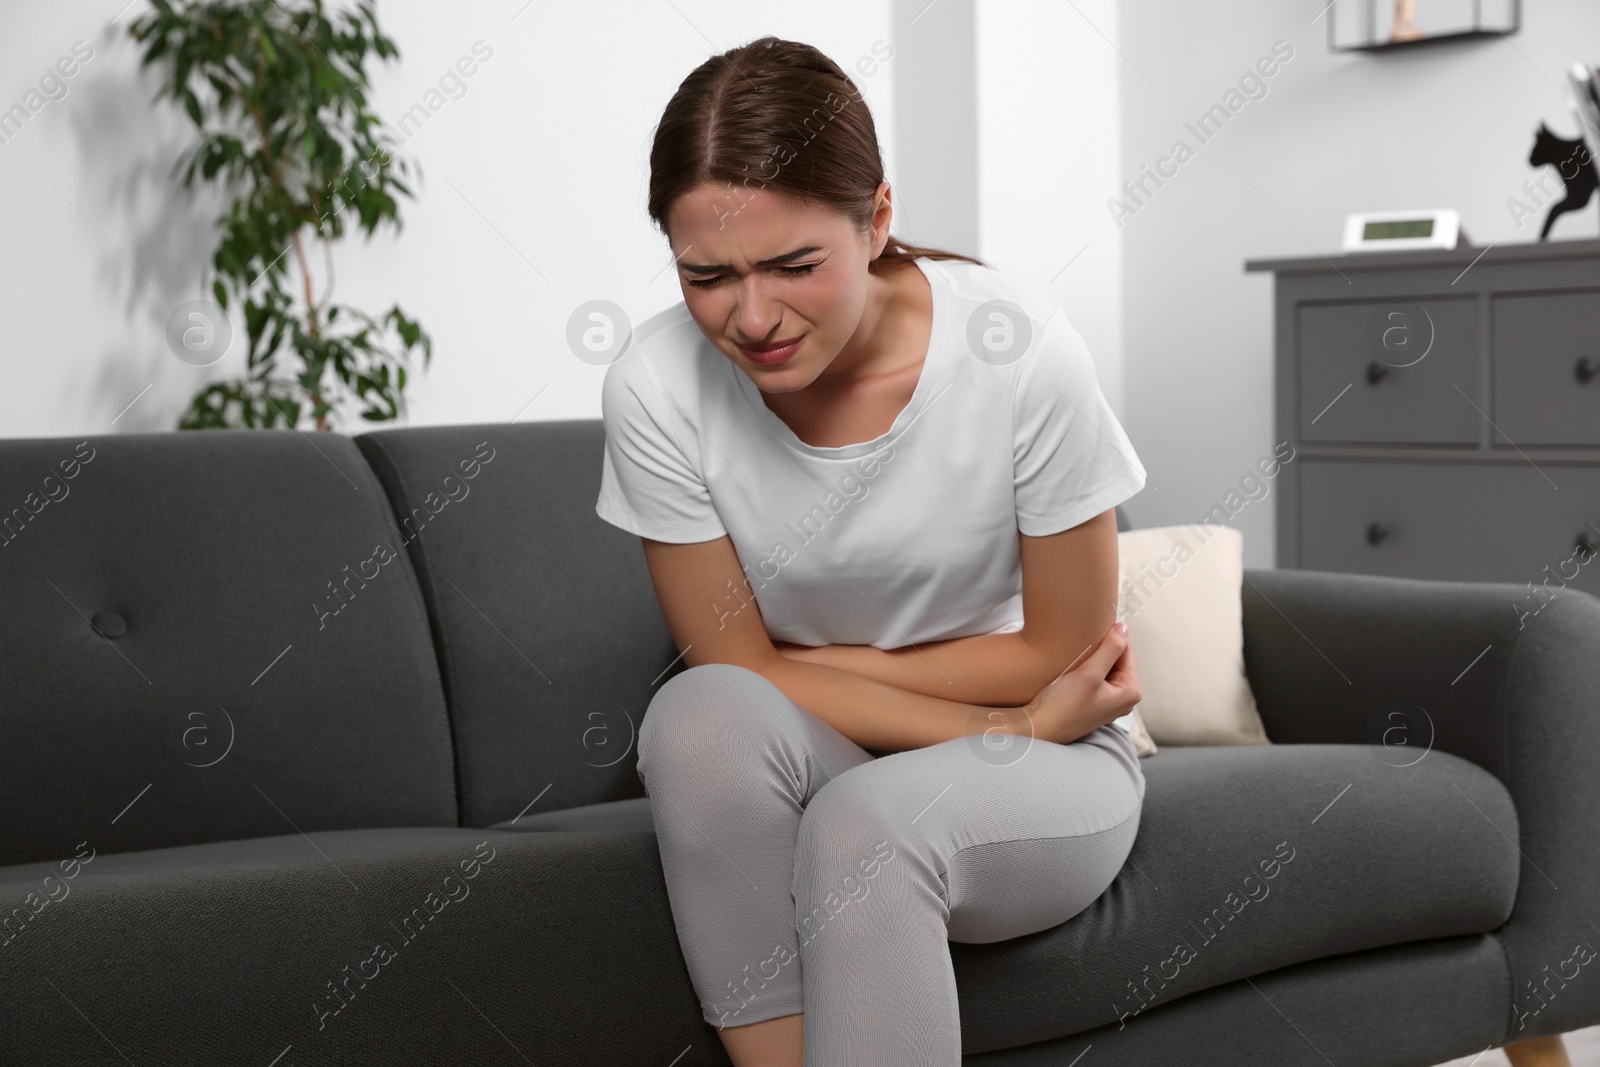 Photo of Young woman suffering from cystitis on sofa at home